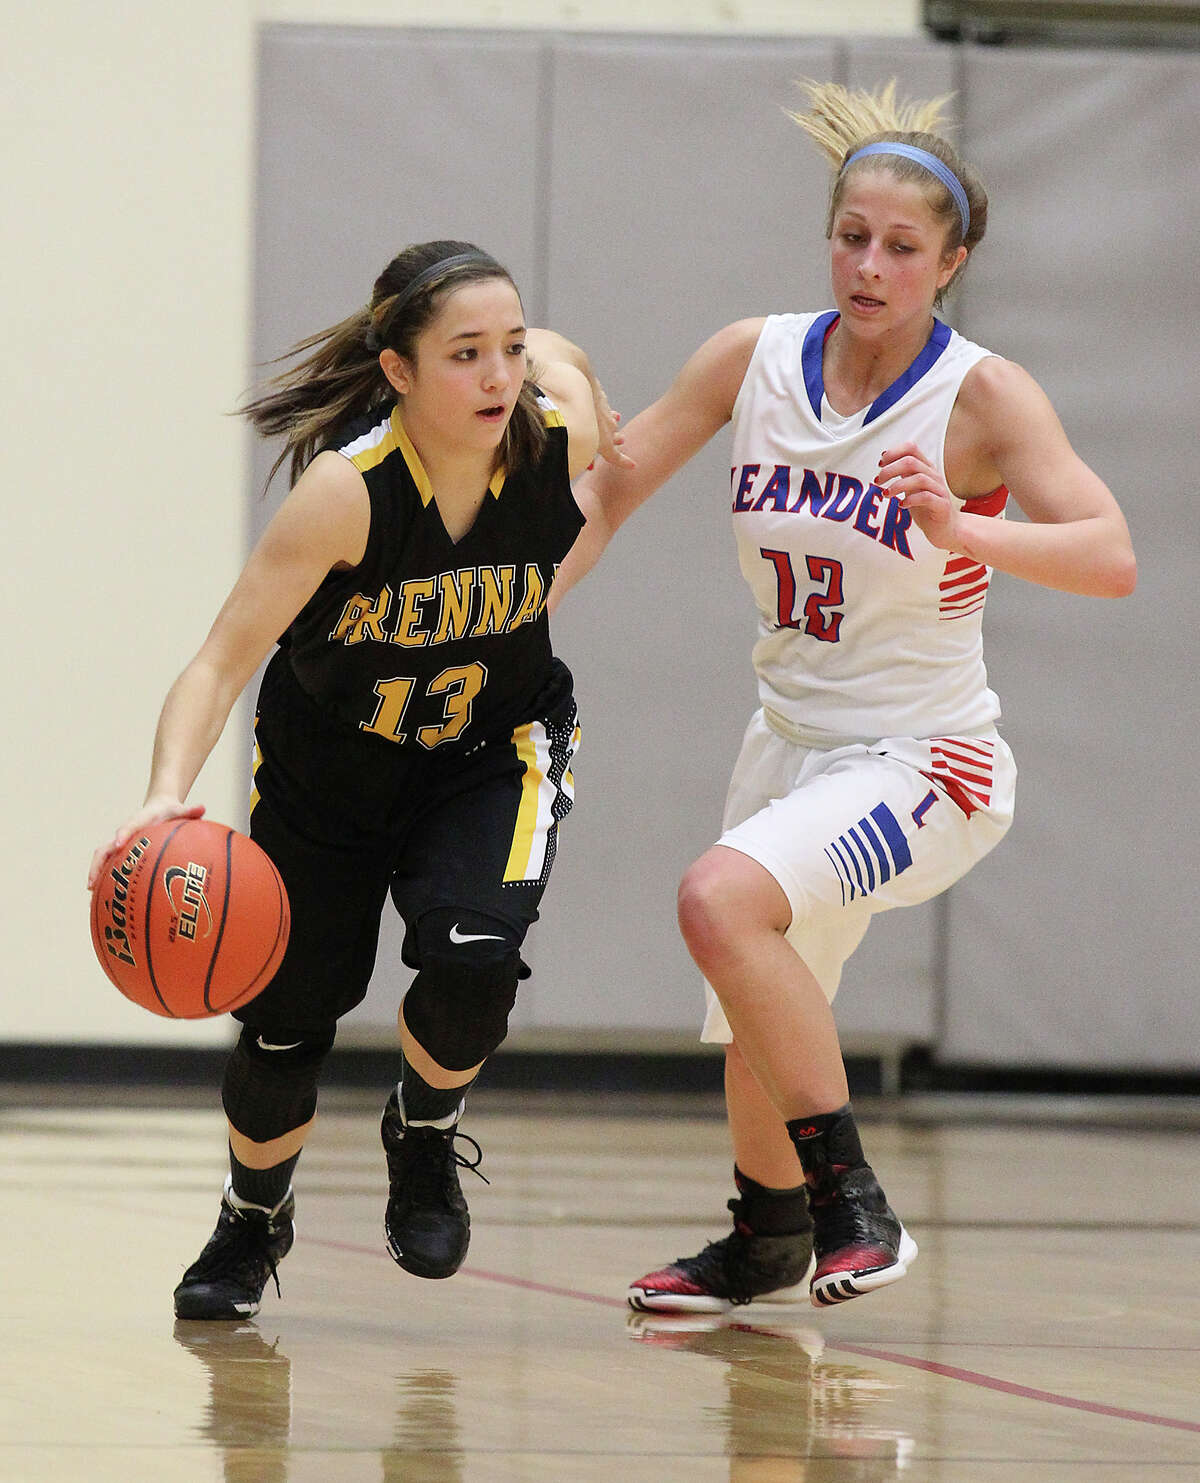 Brennan's Megan Valdez (13) was one of the stars at the recent Southeastern Louisiana University basketball camp for girls. The university offered the junior a scholorship to play next season.